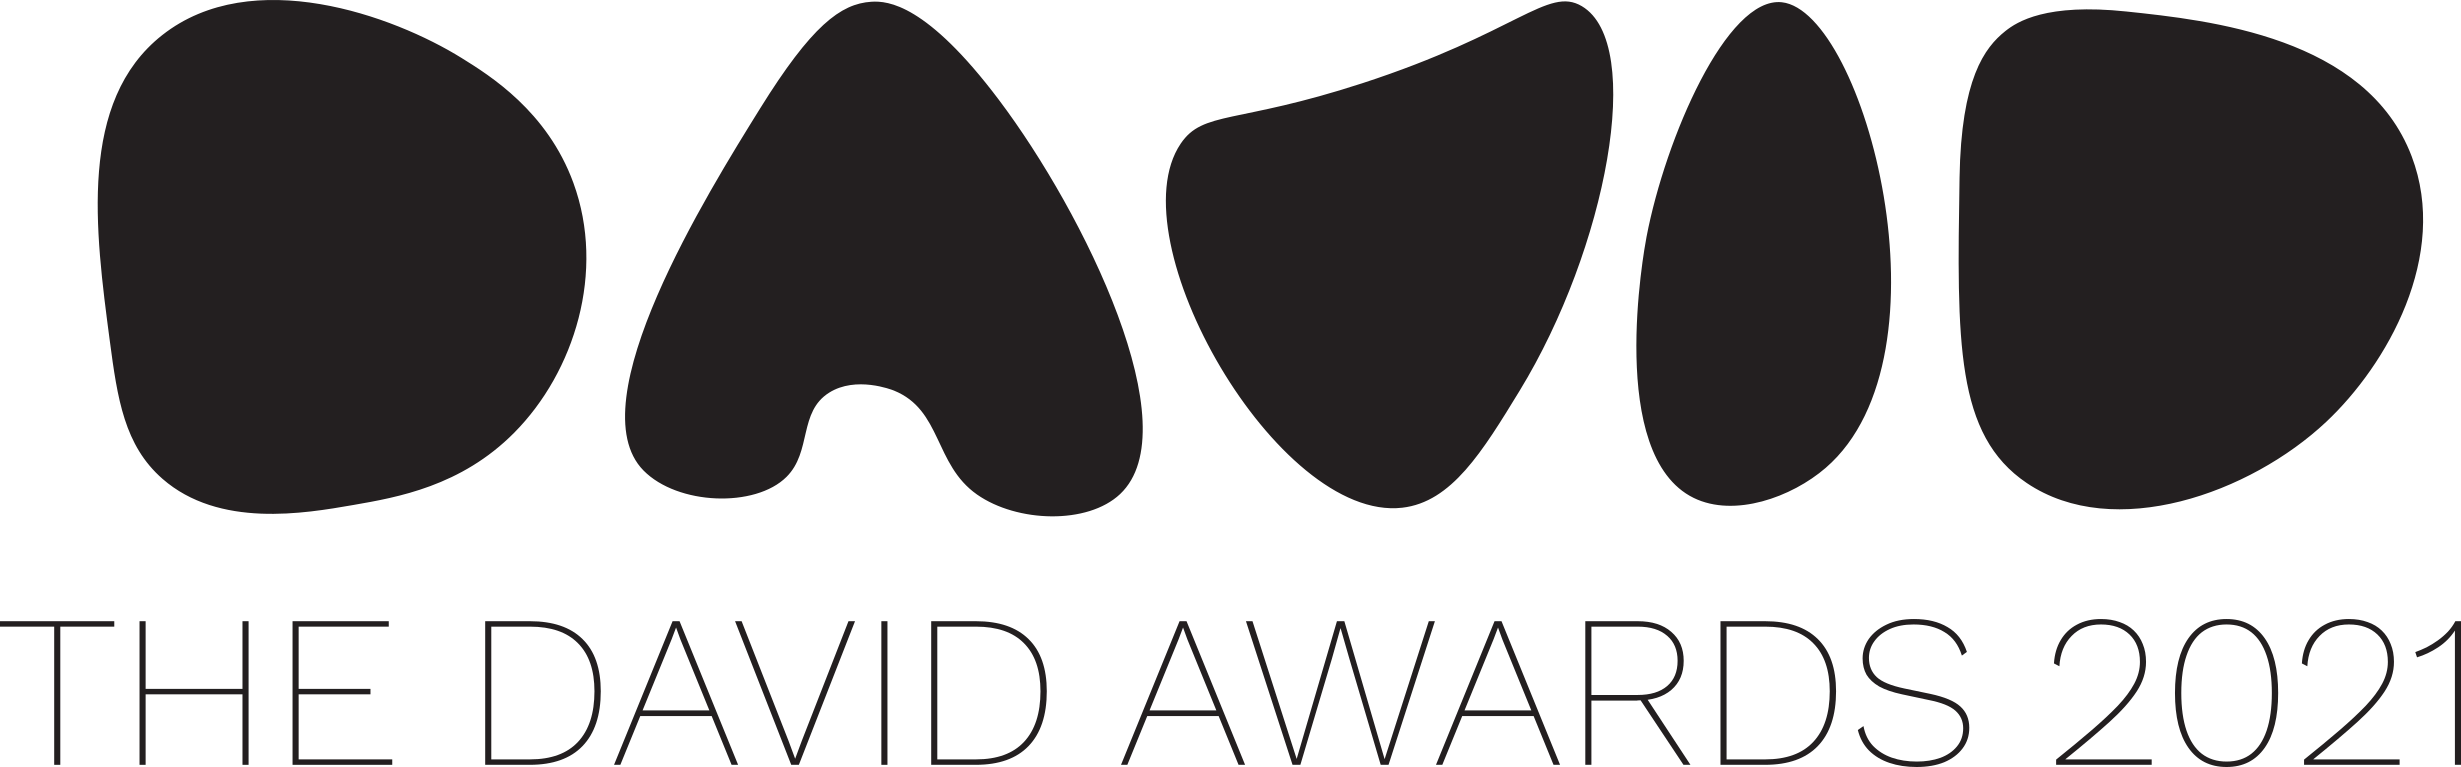 The David Awards - heroes in small business logo